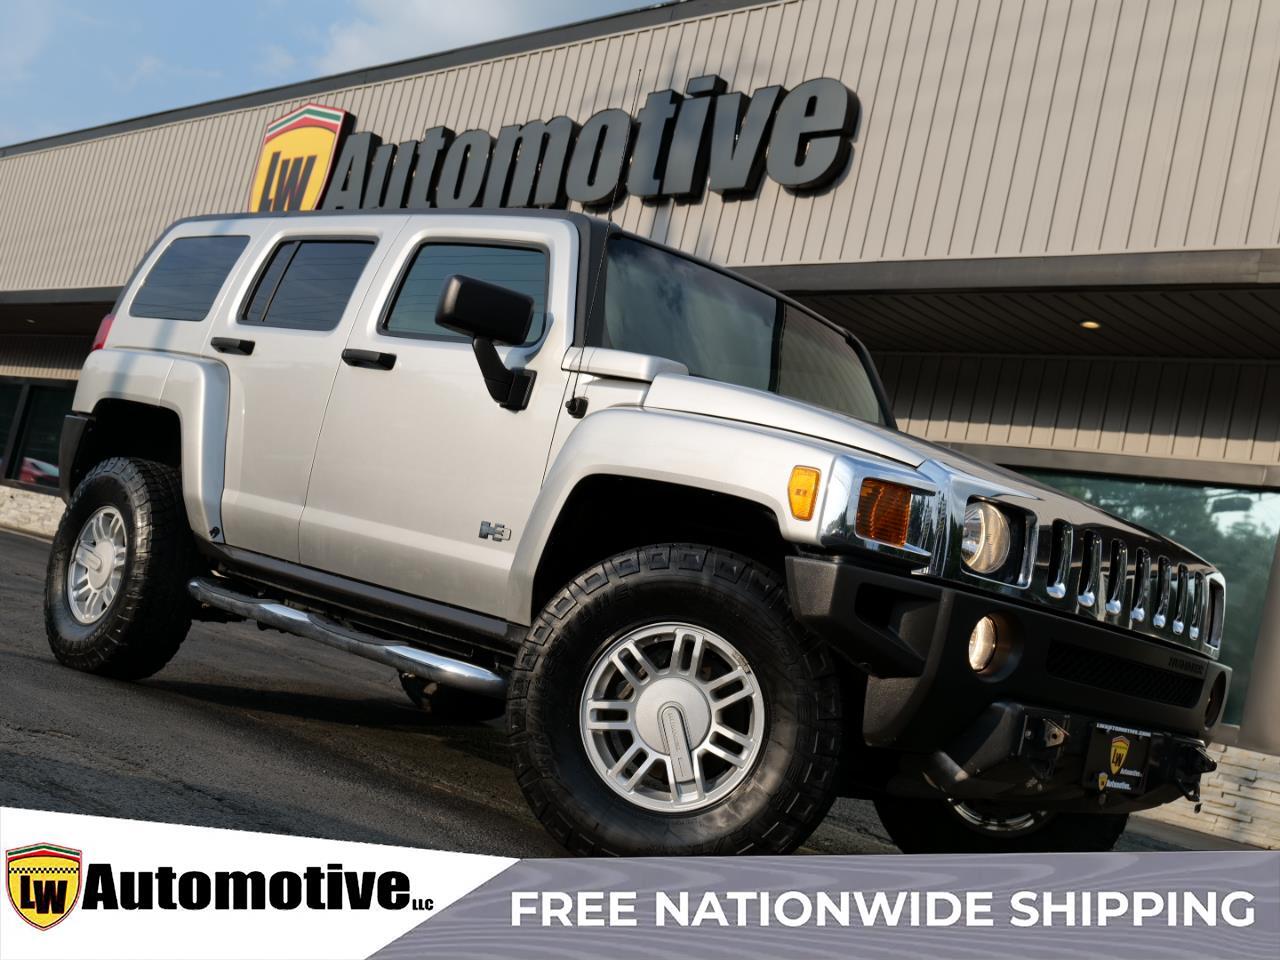 2010 HUMMER H3 SUV 4WD 4dr Luxury